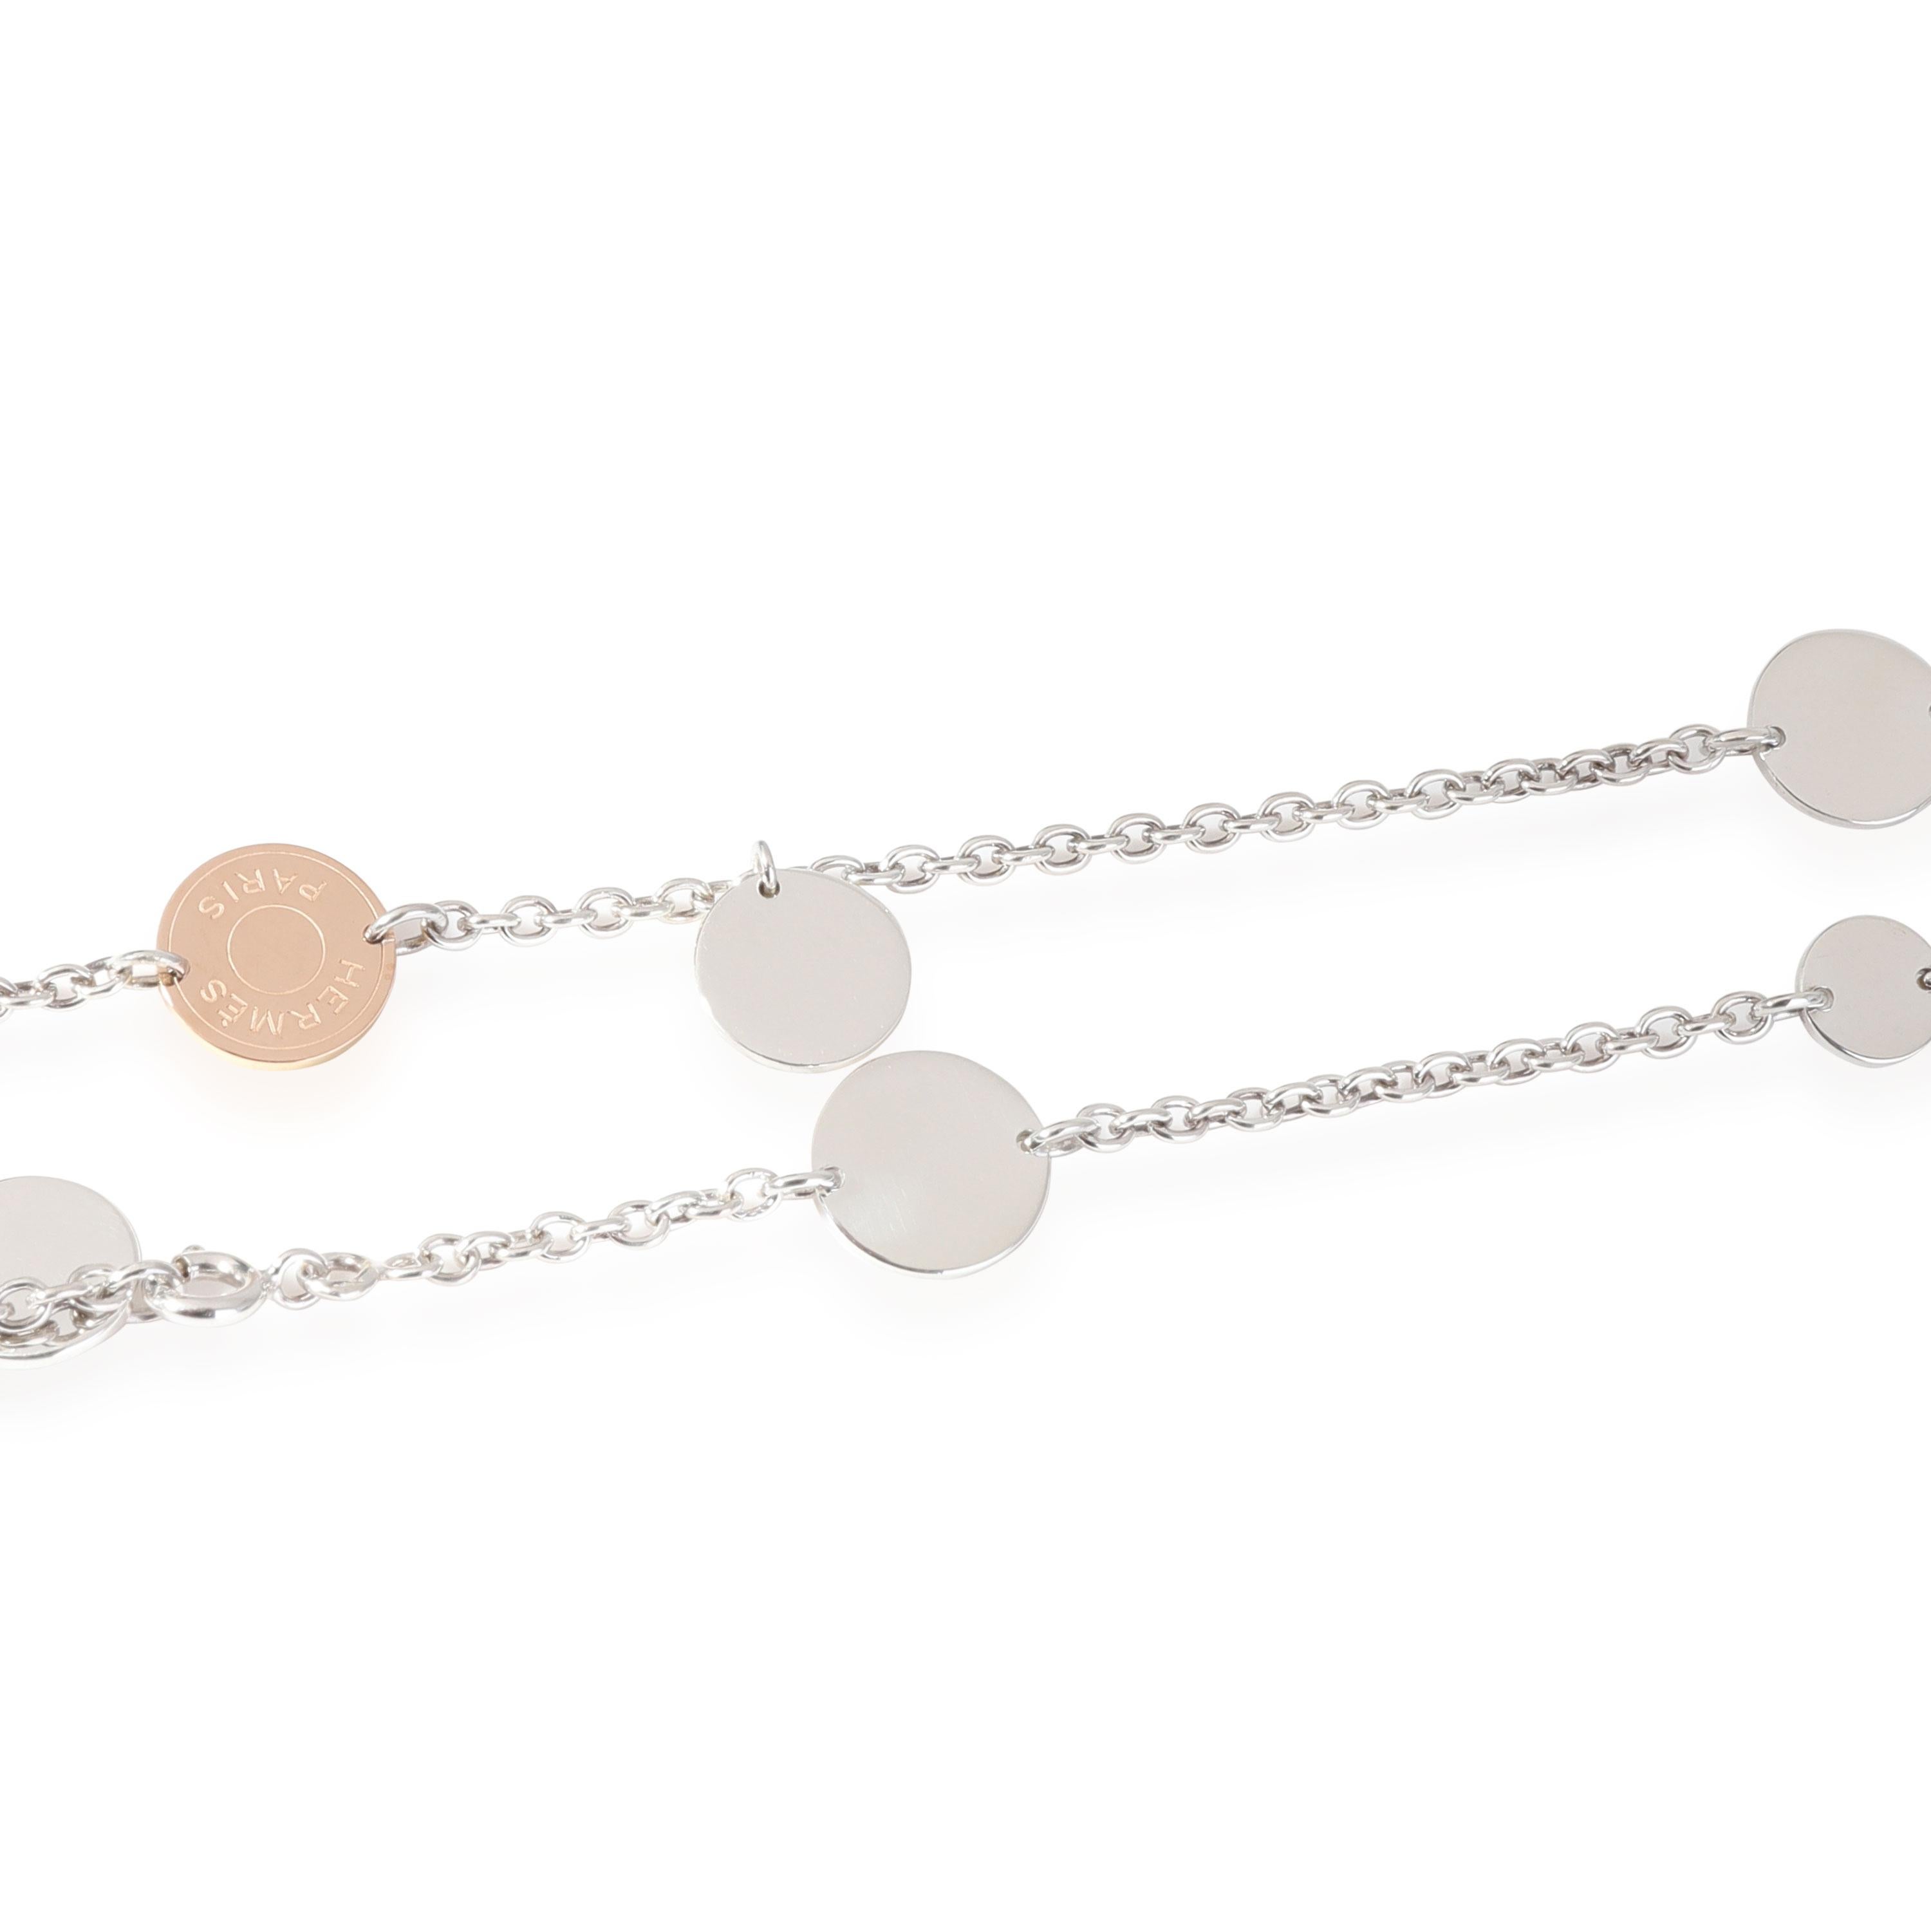 Hermès Confettis Necklace in 18k Pink Gold/Sterling Silver

PRIMARY DETAILS
SKU: 119105
Listing Title: Hermès Confettis Necklace in 18k Pink Gold/Sterling Silver
Condition Description: Retails for 1425 USD. Length is 31.5 inches. Comes with